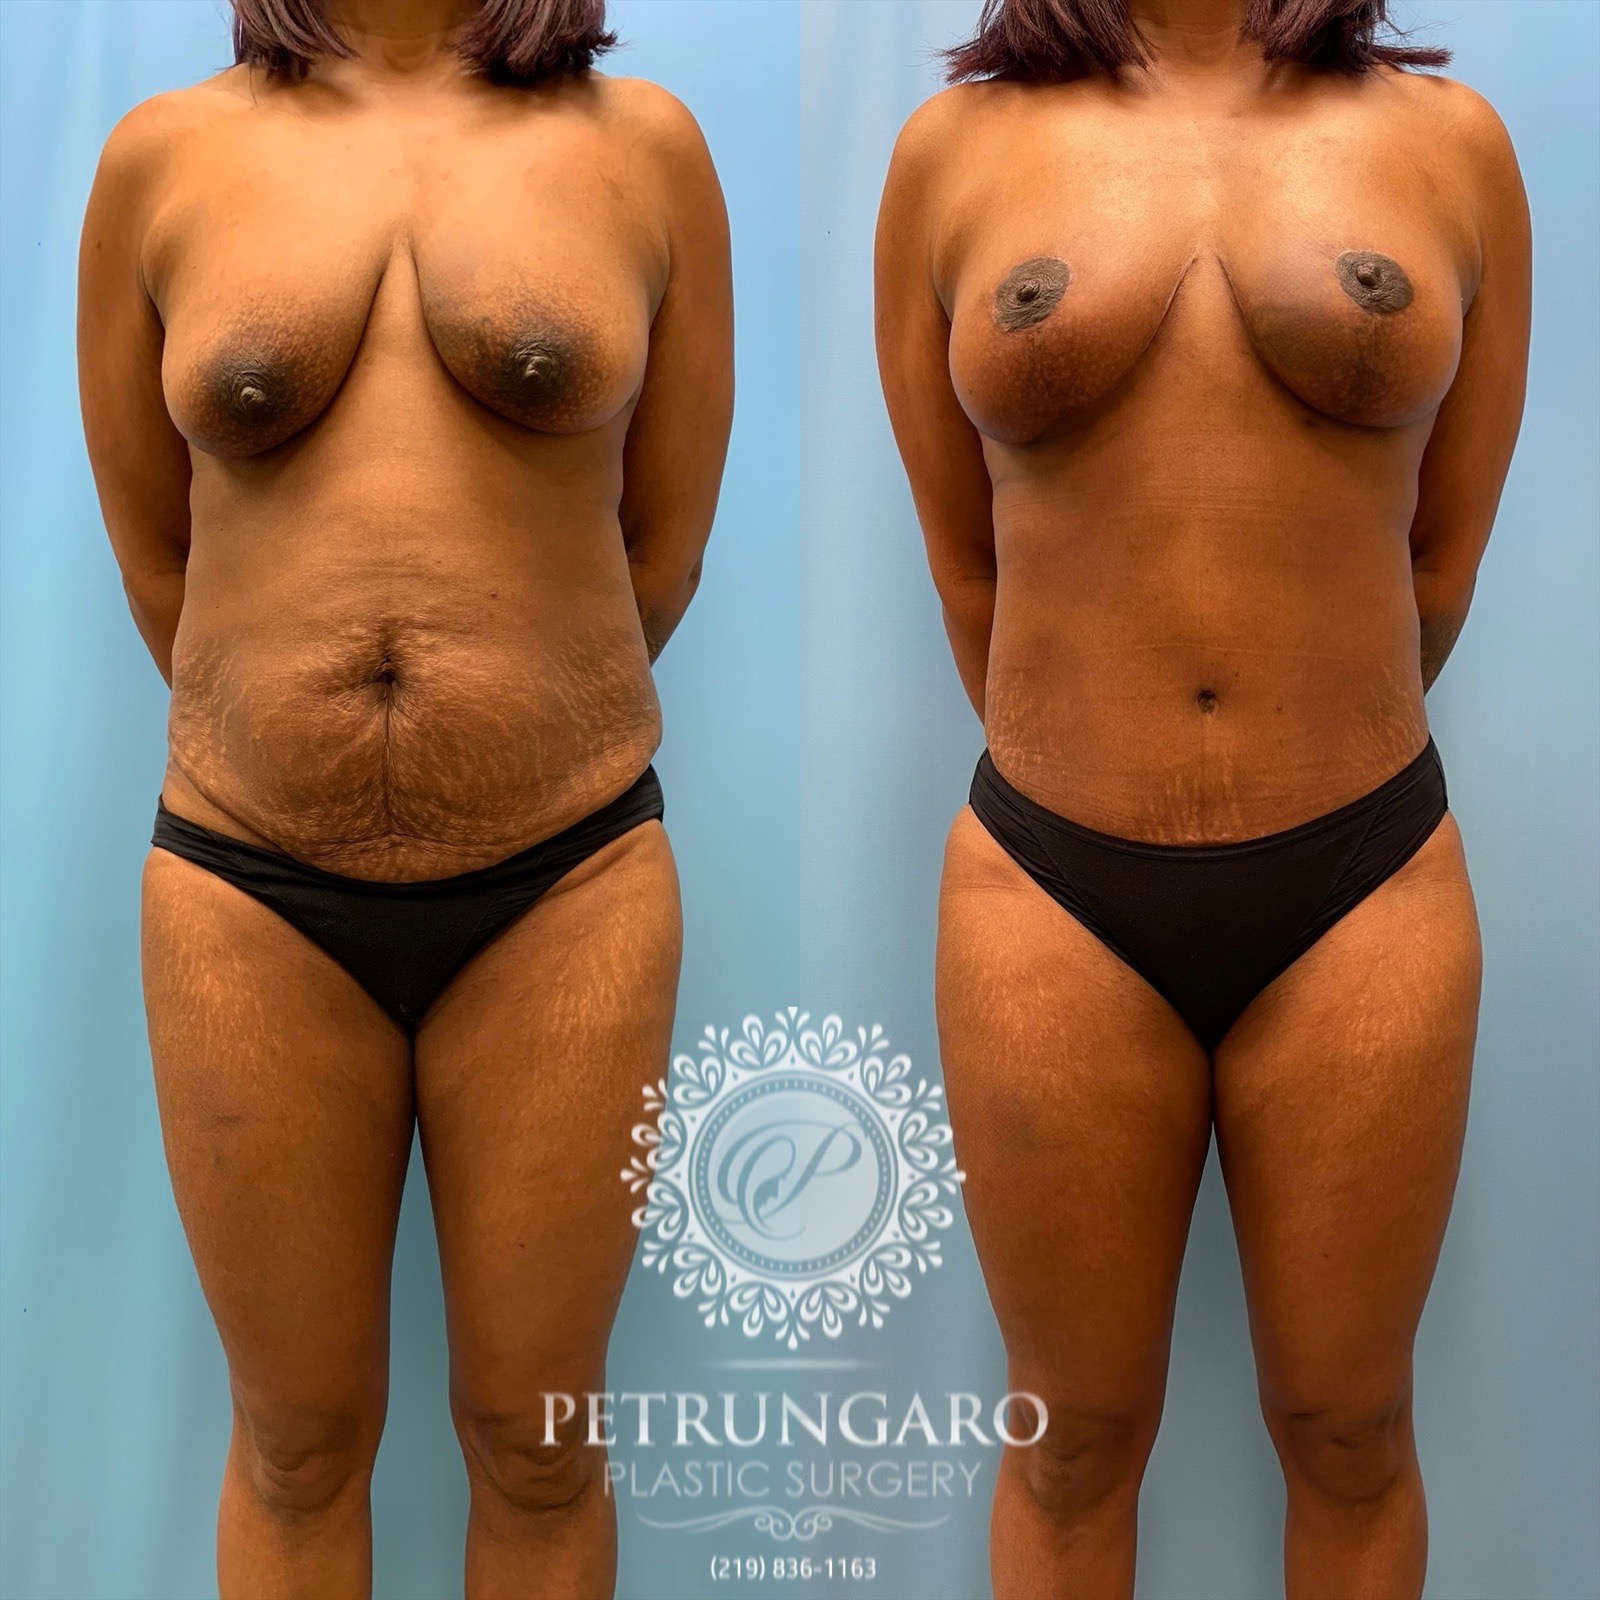 43 year old woman 3 months after Mommy Makeover-1